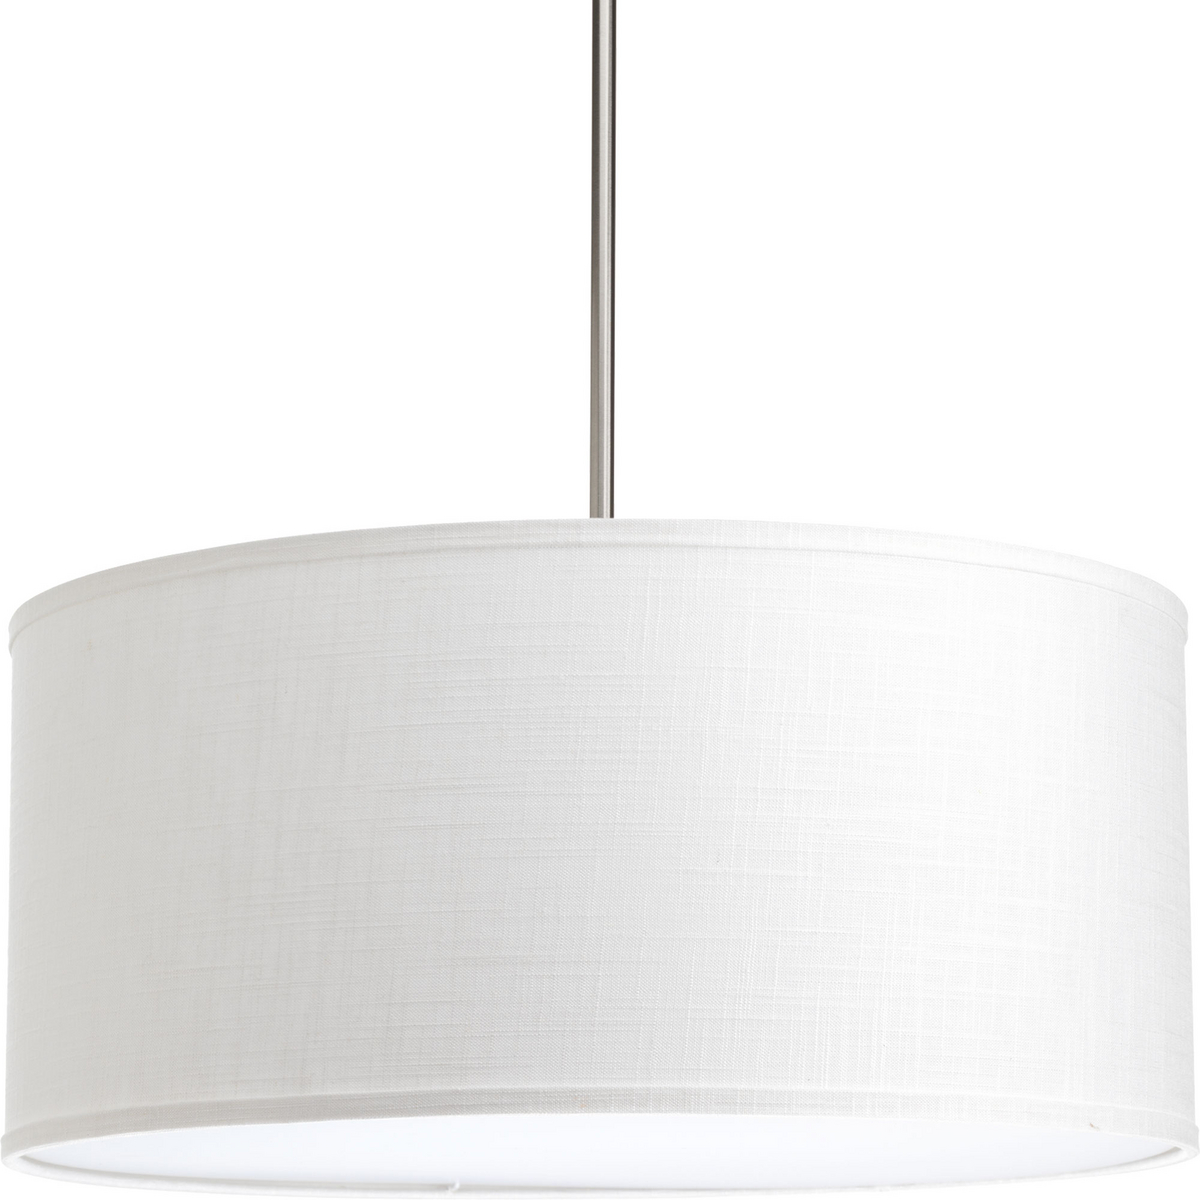 The Markor Series is a modular pendant system. The versatile series allow the choice of shades and stem kits. This 22 in shade with summer linen fabric is inspired by mid-century design. Acrylic bottom diffuser. This shade can be used with a variety of stem kits from 1 to 3 light in CFL, LED and incandescent light sources.